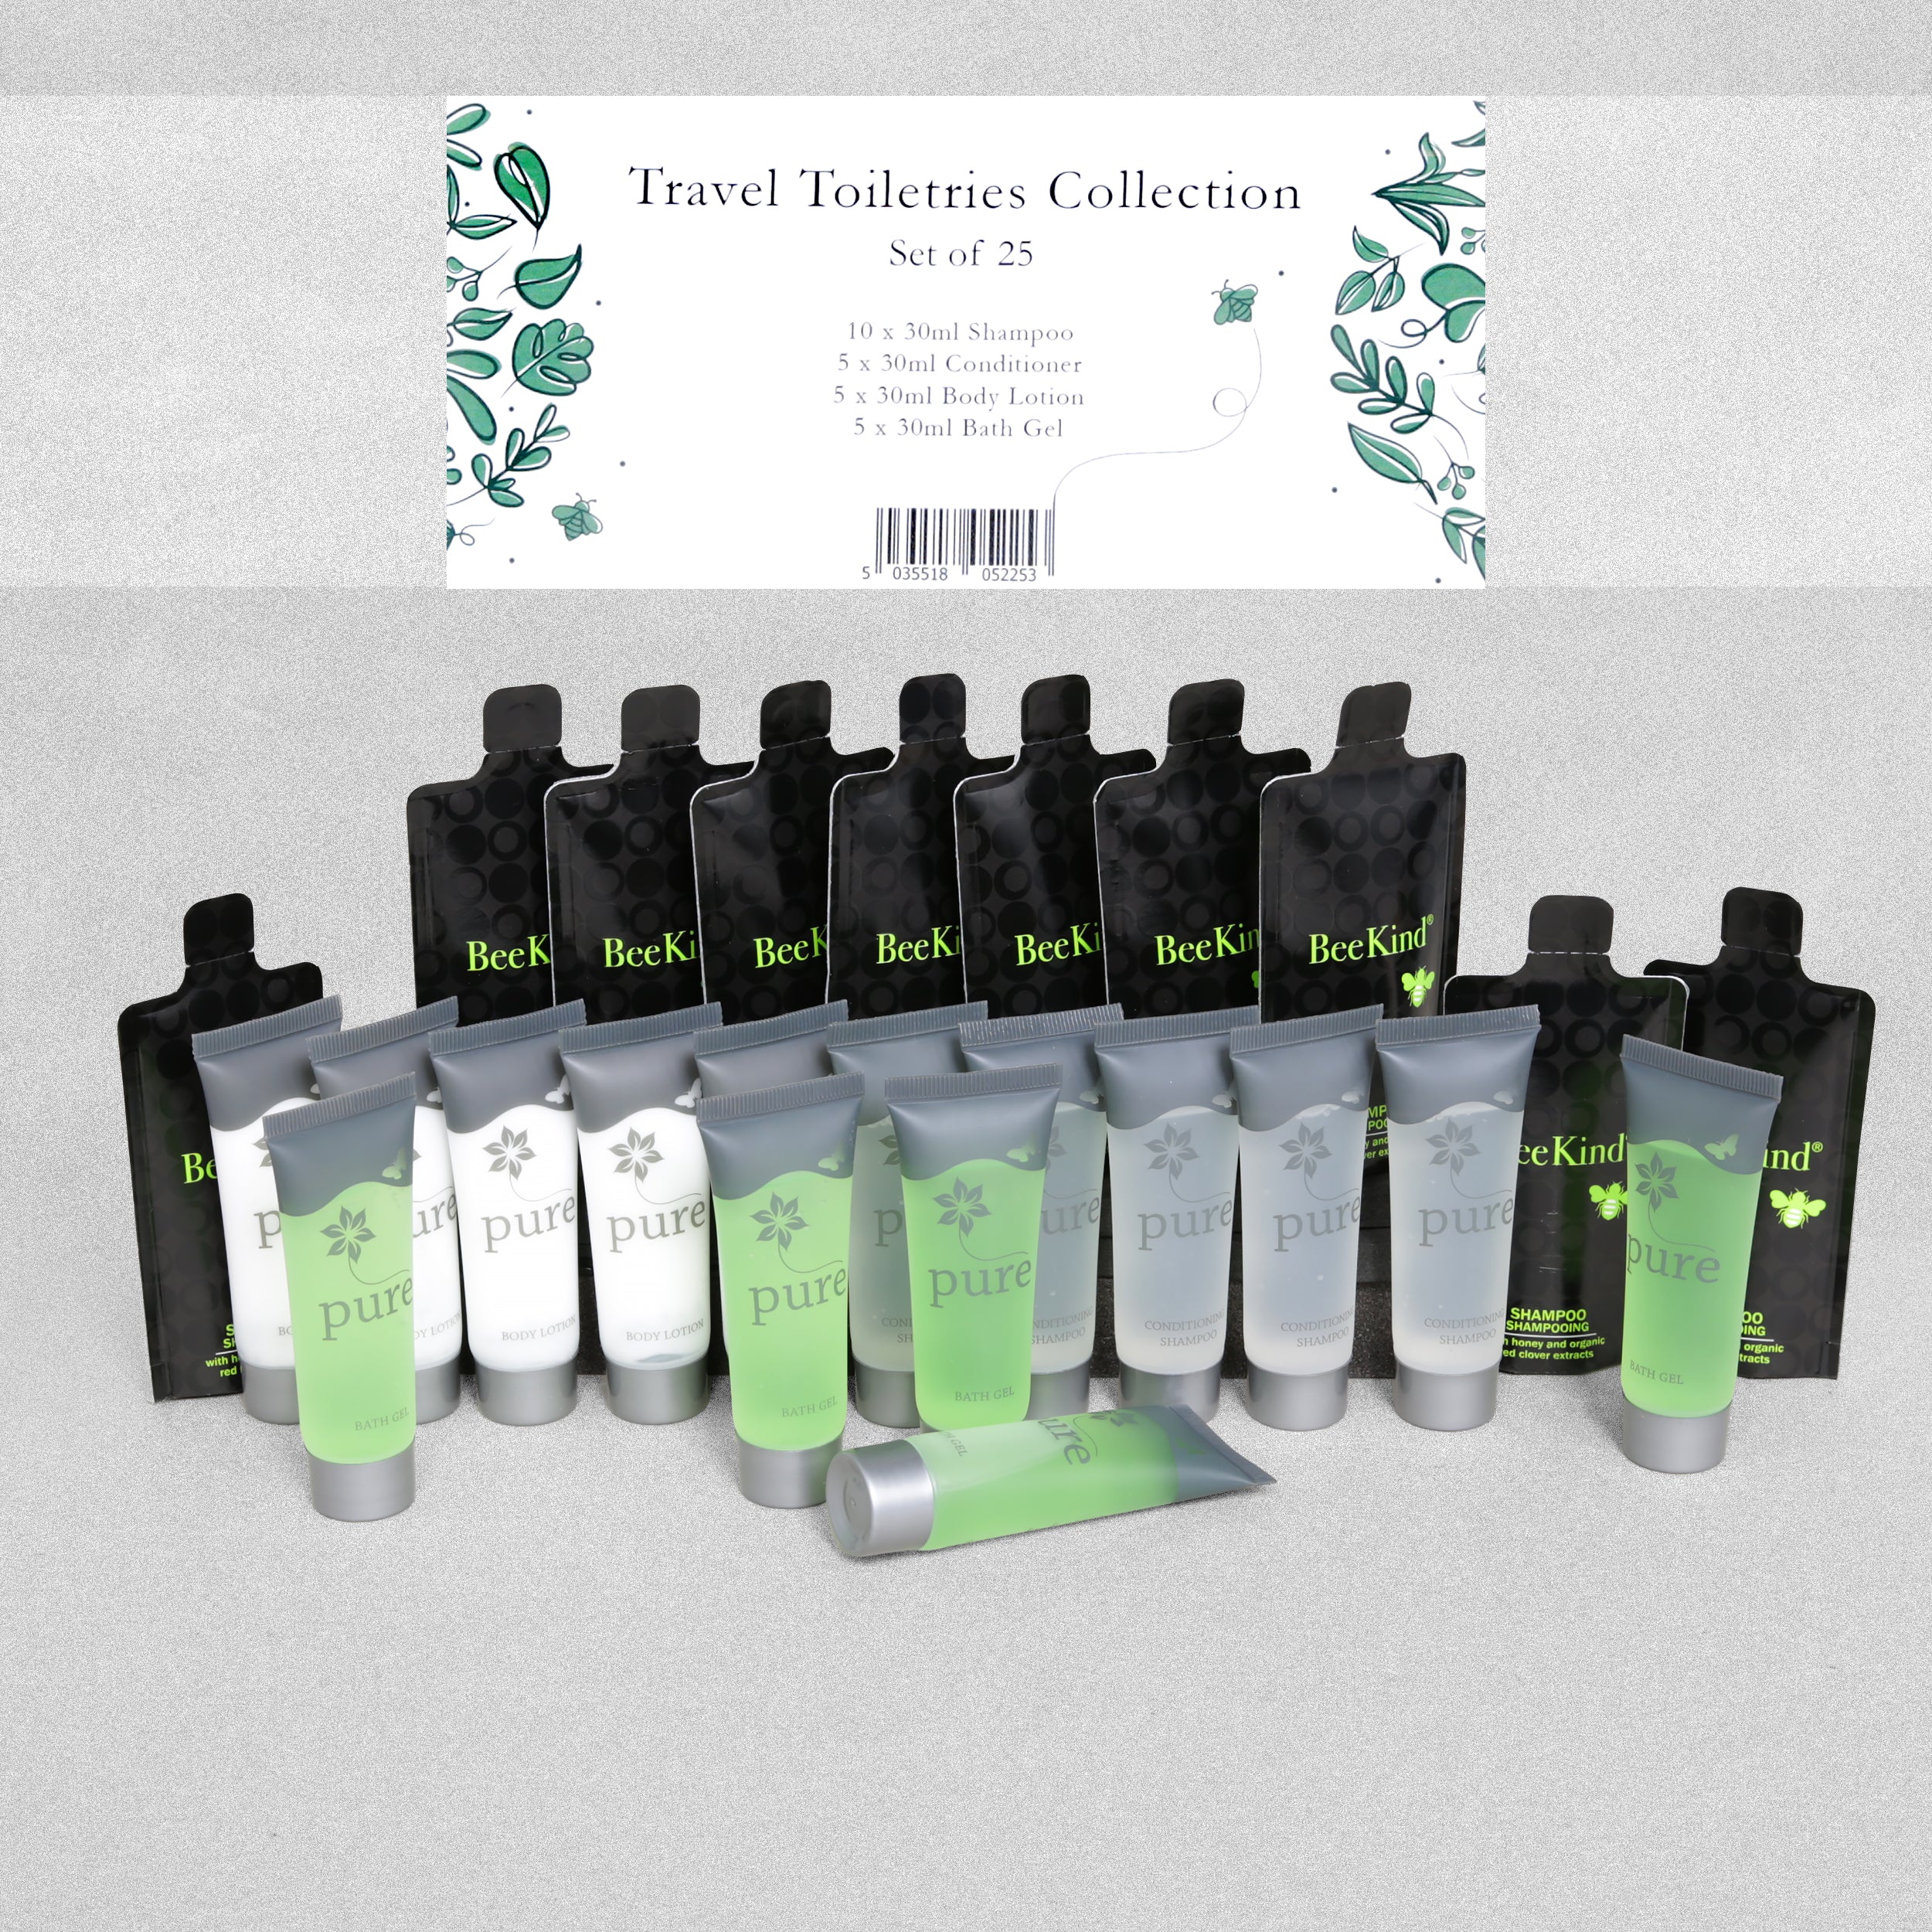 Travel Toiletries Collection - Set of 25